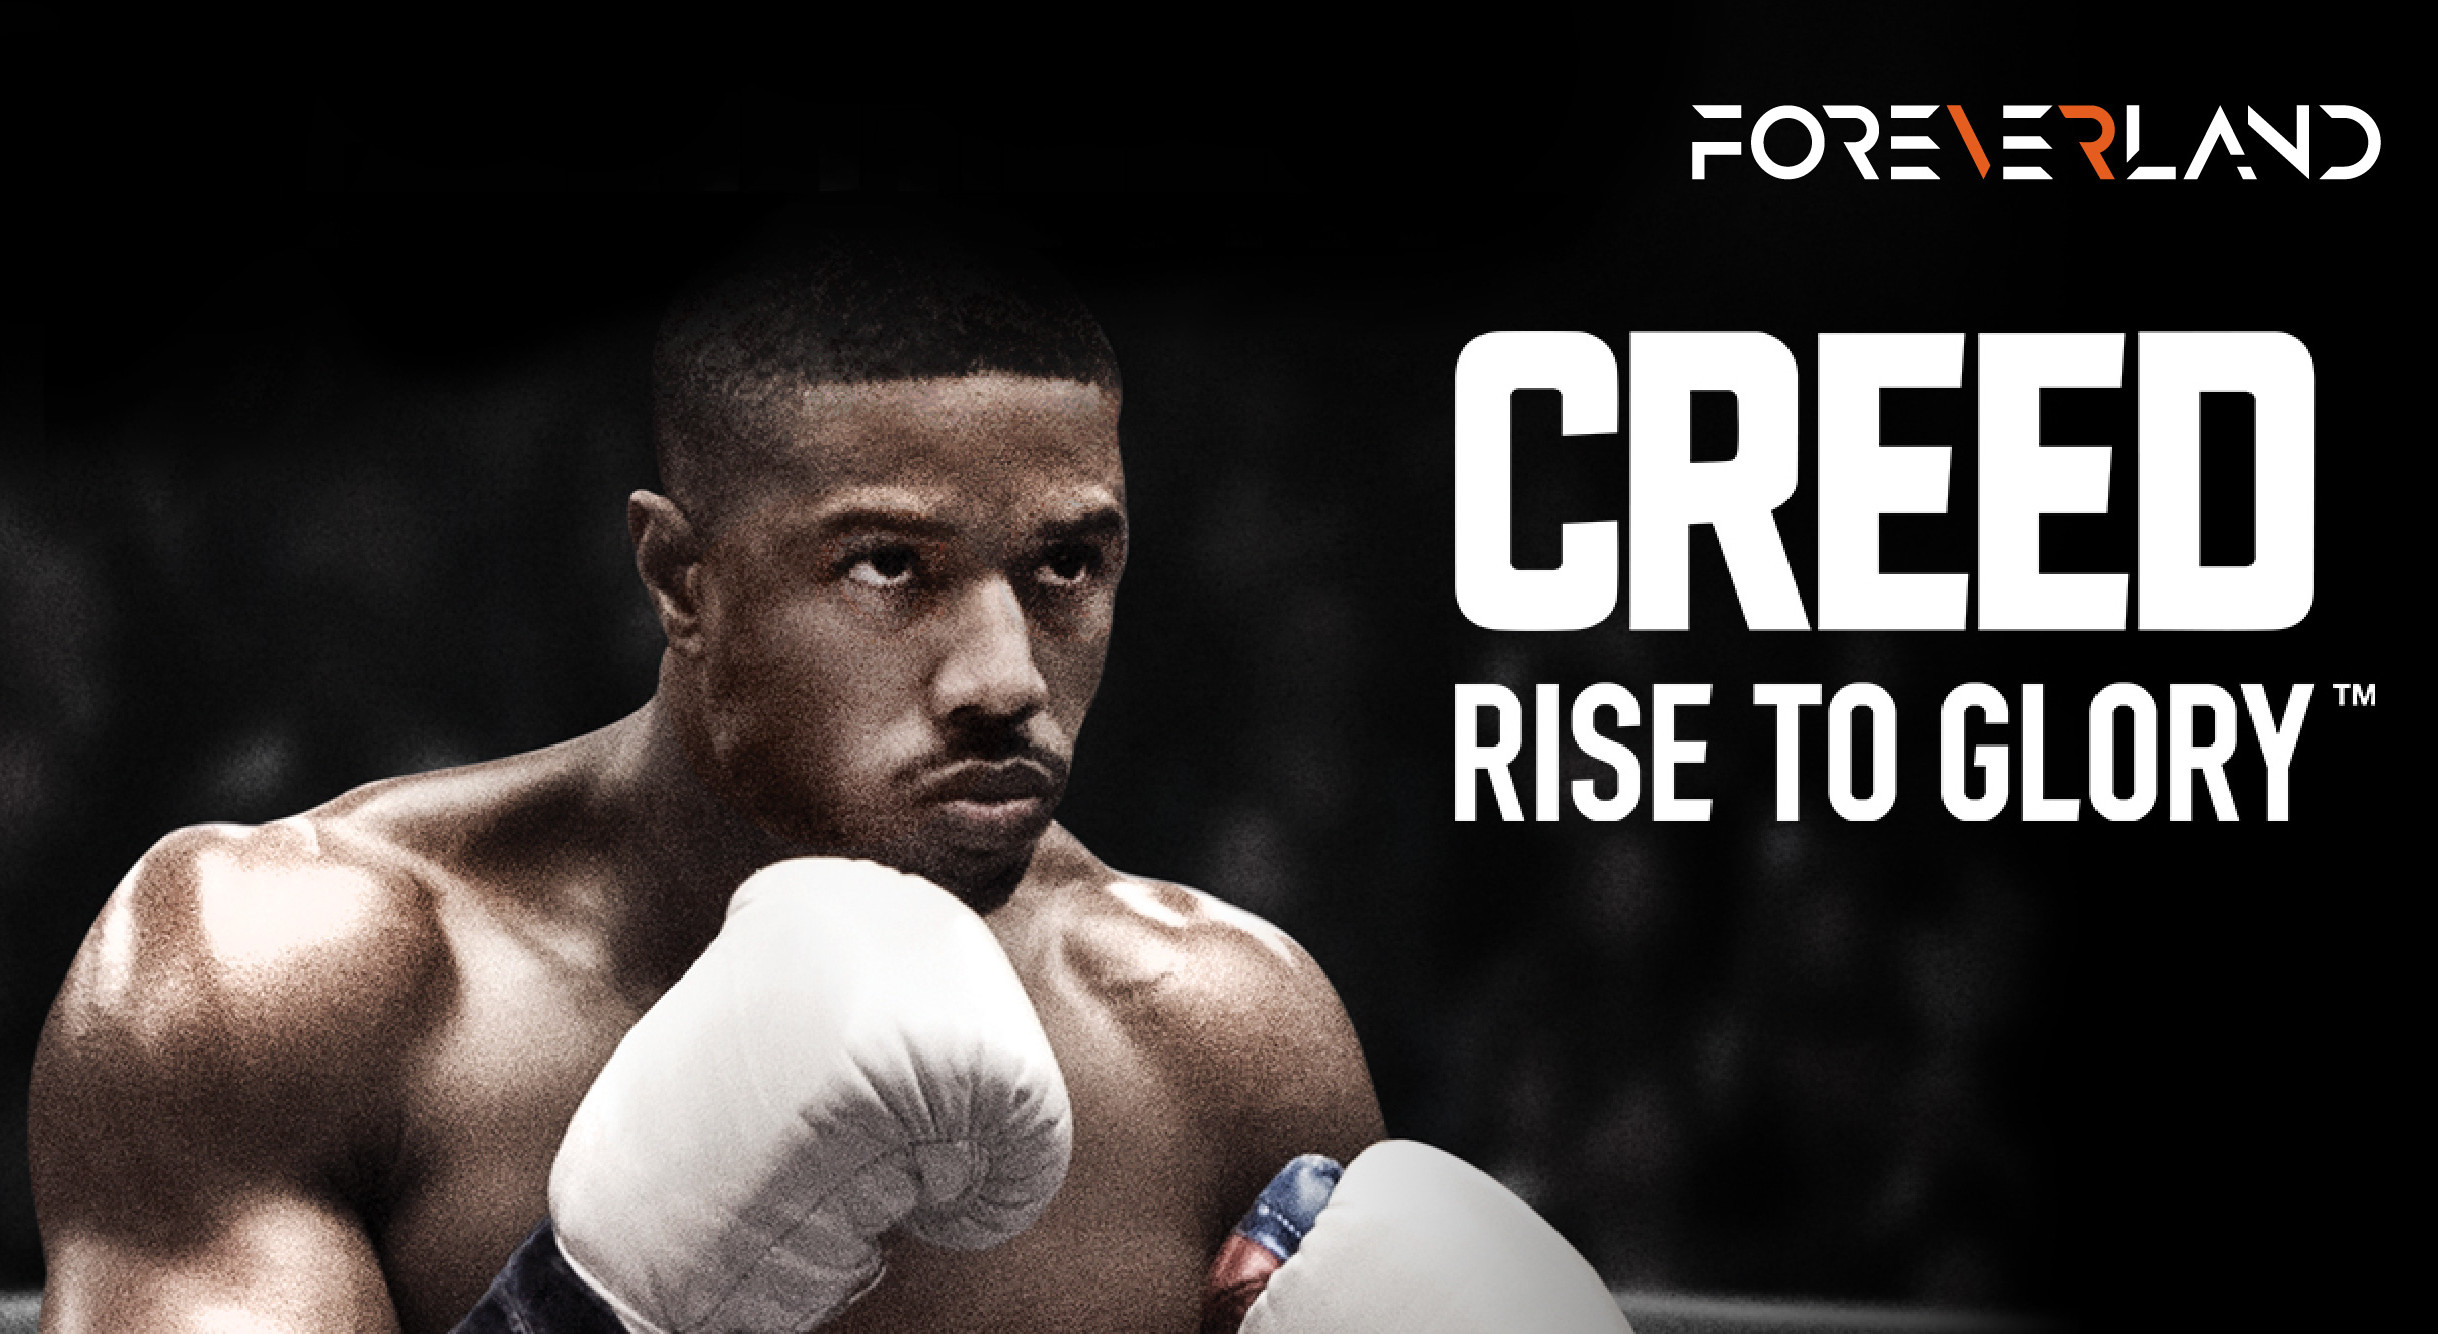 Rise to glory vr. Creed Rise to Glory. Creed VR. Creed VR игра. Меню Creed: Rise to Glory.